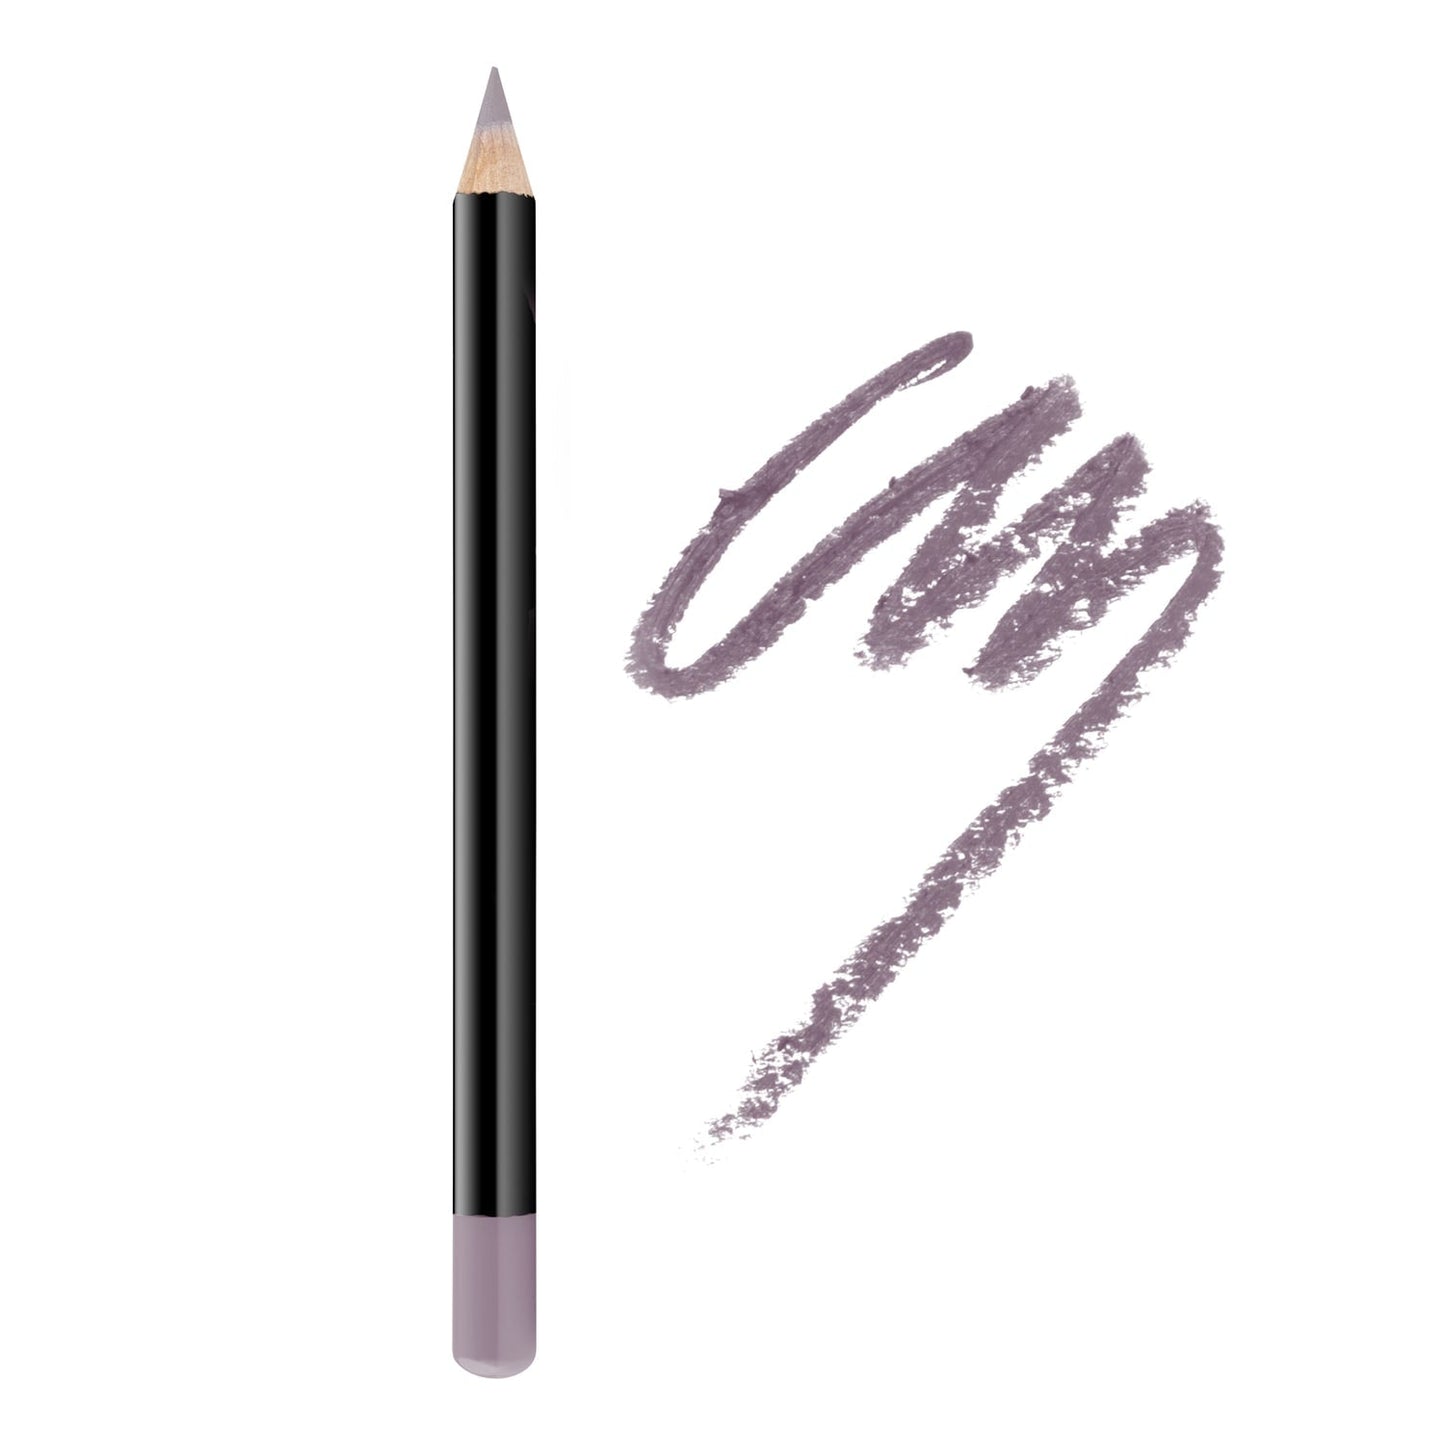 Eyeliner Pencil - M&H FashionEyeliner Pencileye-pencilM&H FashionM&H FashionEye-Pencil-6Purple Eye Pencil (06)Eyeliner PencilM&H Fashioneye-pencilM&H Fashion These cushiony, creamy eyeliner pencil deliver powerful, vibrant color that slides on smoothly. The soft texture glides on effortlessly because of the high-quality Eyeliner Pencil